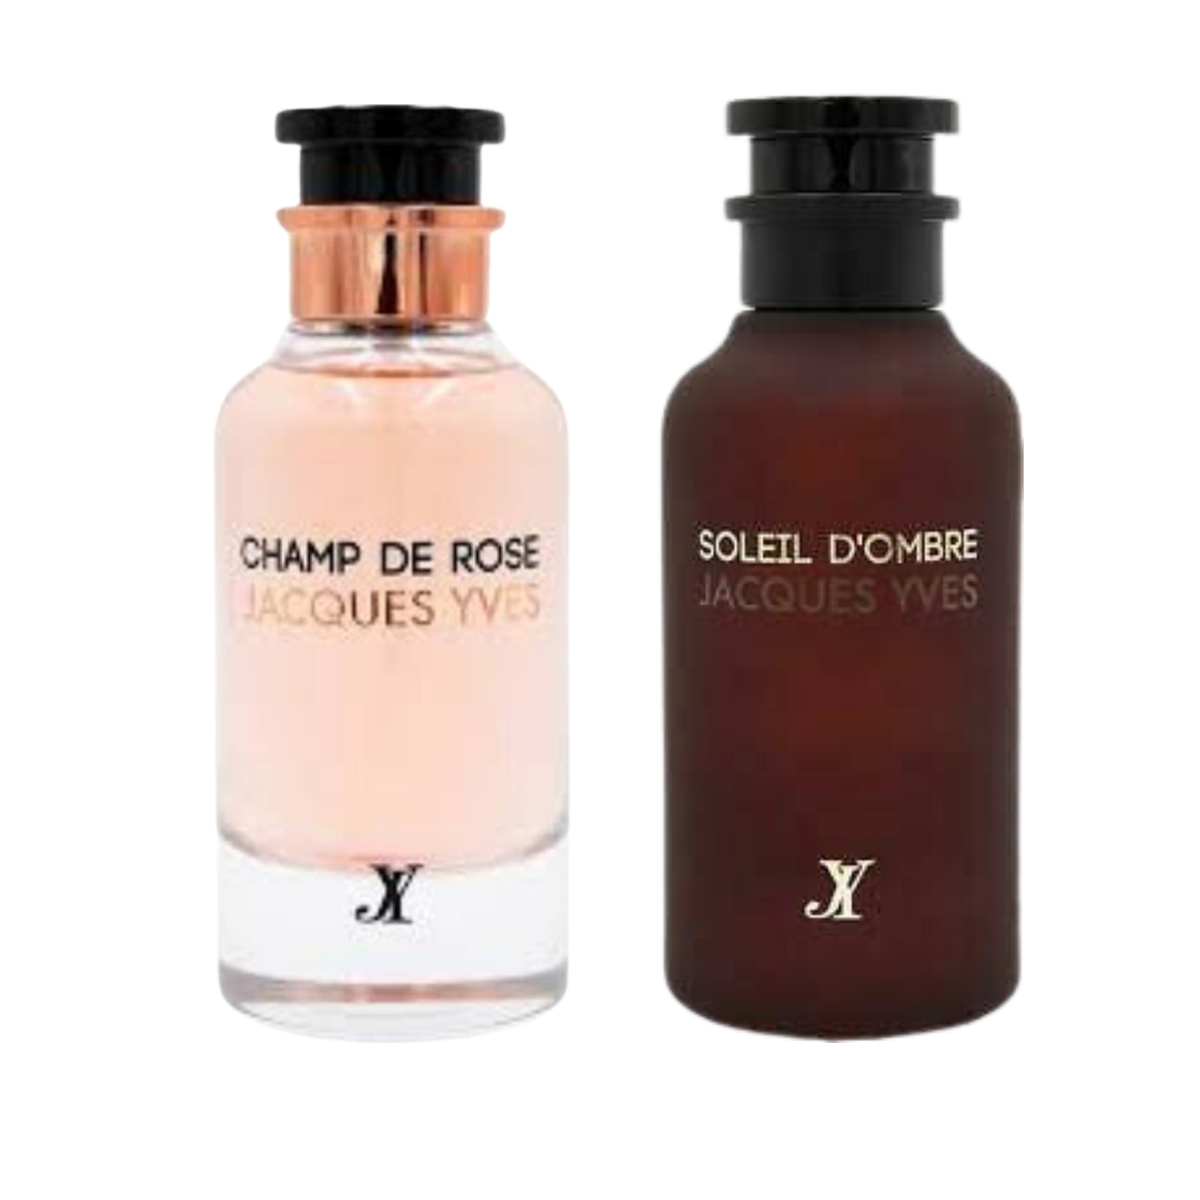 Champ De Rose - Acques Yves EDP - 100ml - Inspired by Rose Des Vents